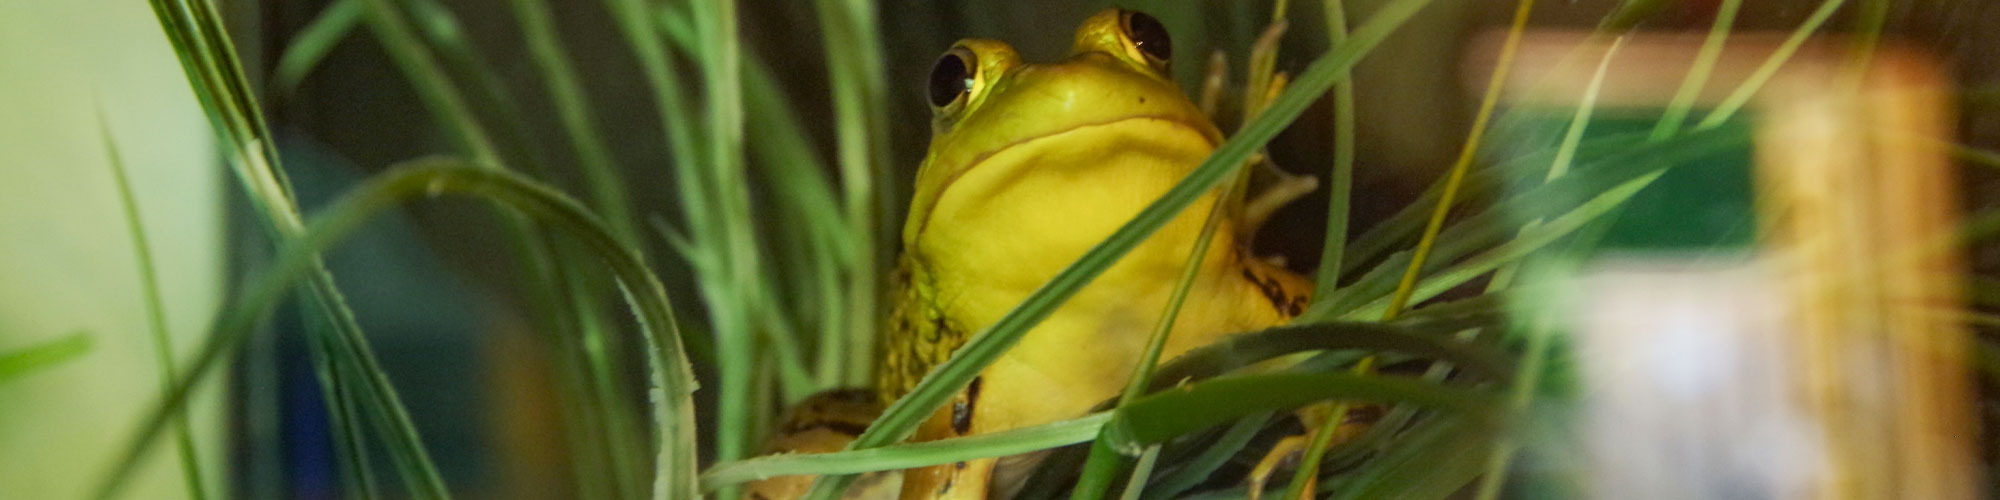 Green Frog | Squam Lakes Natural Science Center